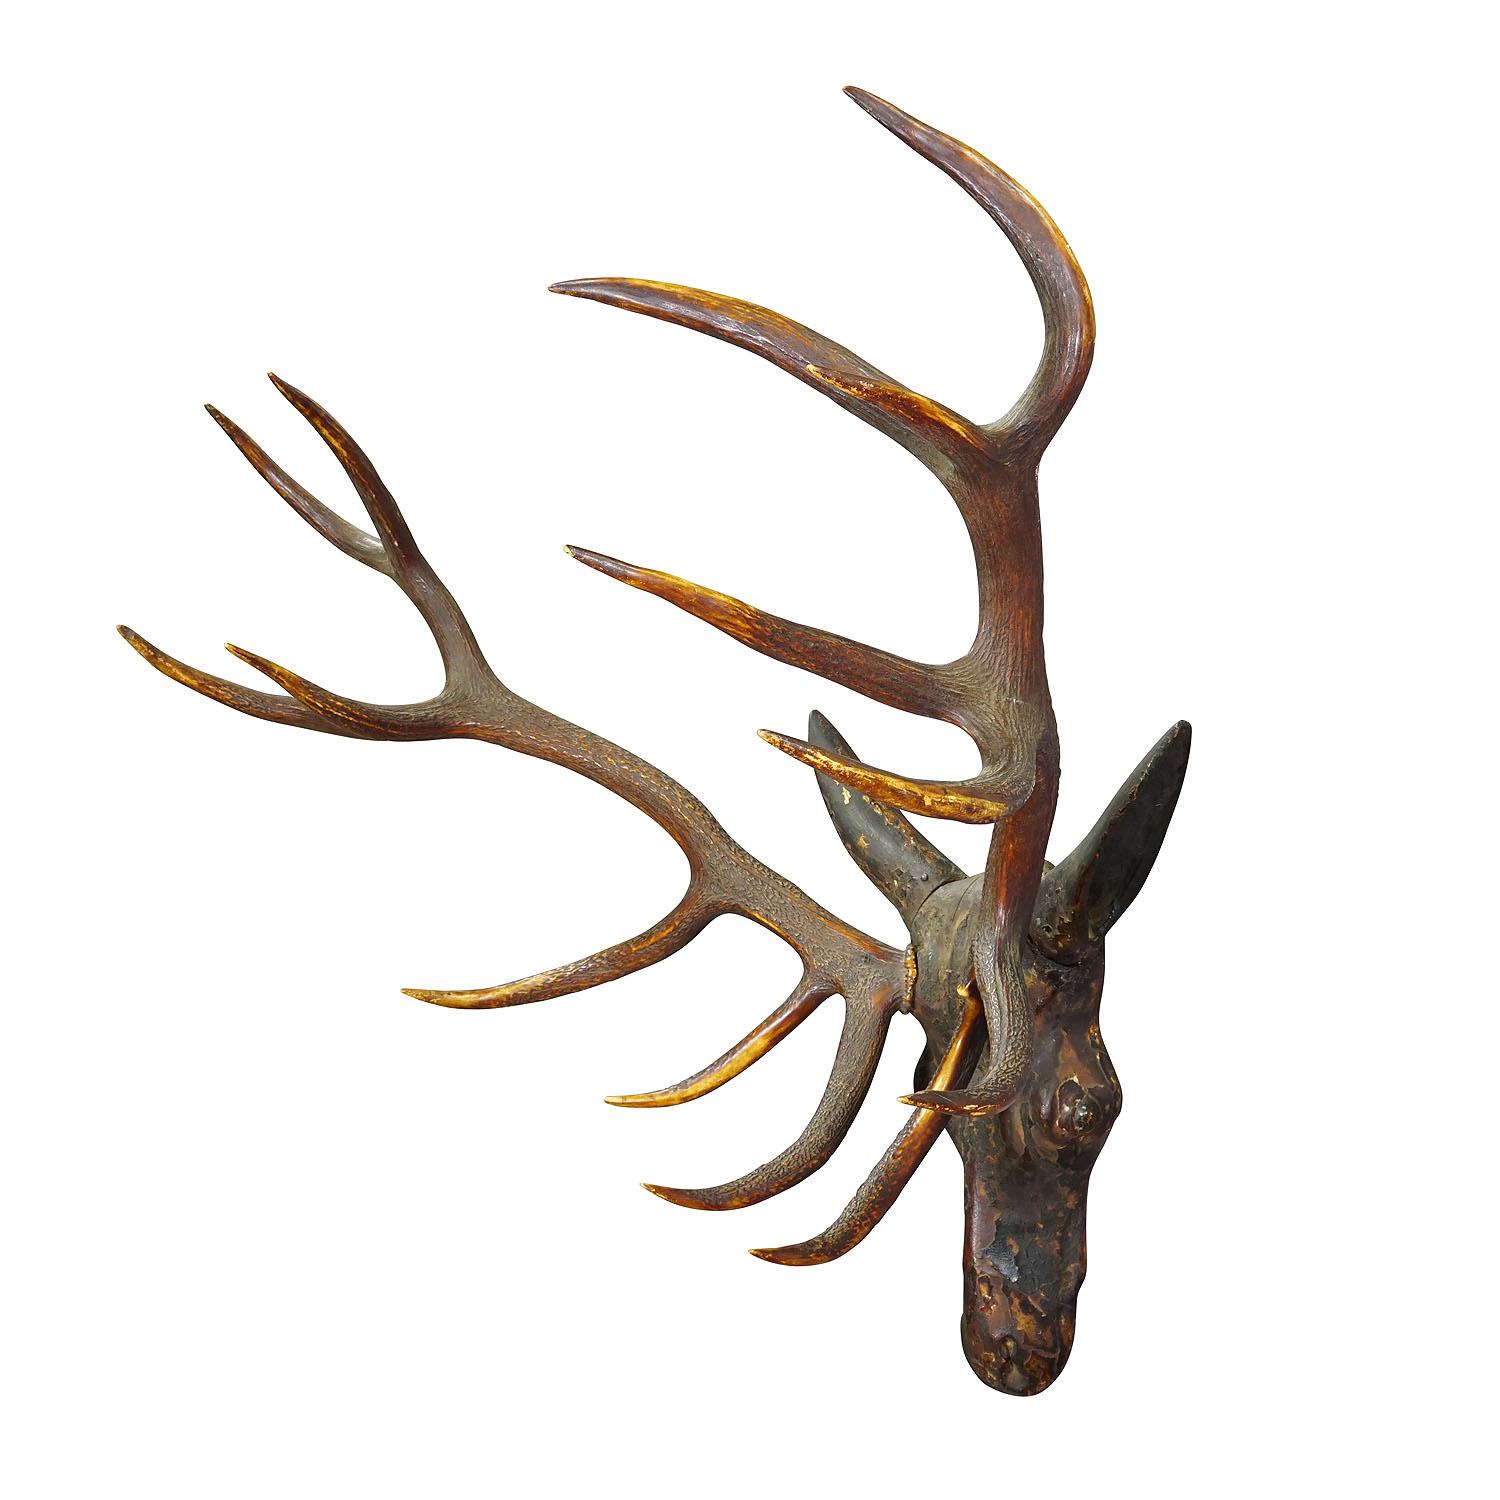 Sculptural Antique Wooden Carved Black Forest Baroque Deer Head

An antique wooden carved Black Forest baroque deer head. Carved in typical abstract style of the 18th century. It features a large real deer antler trophy and rests of its original